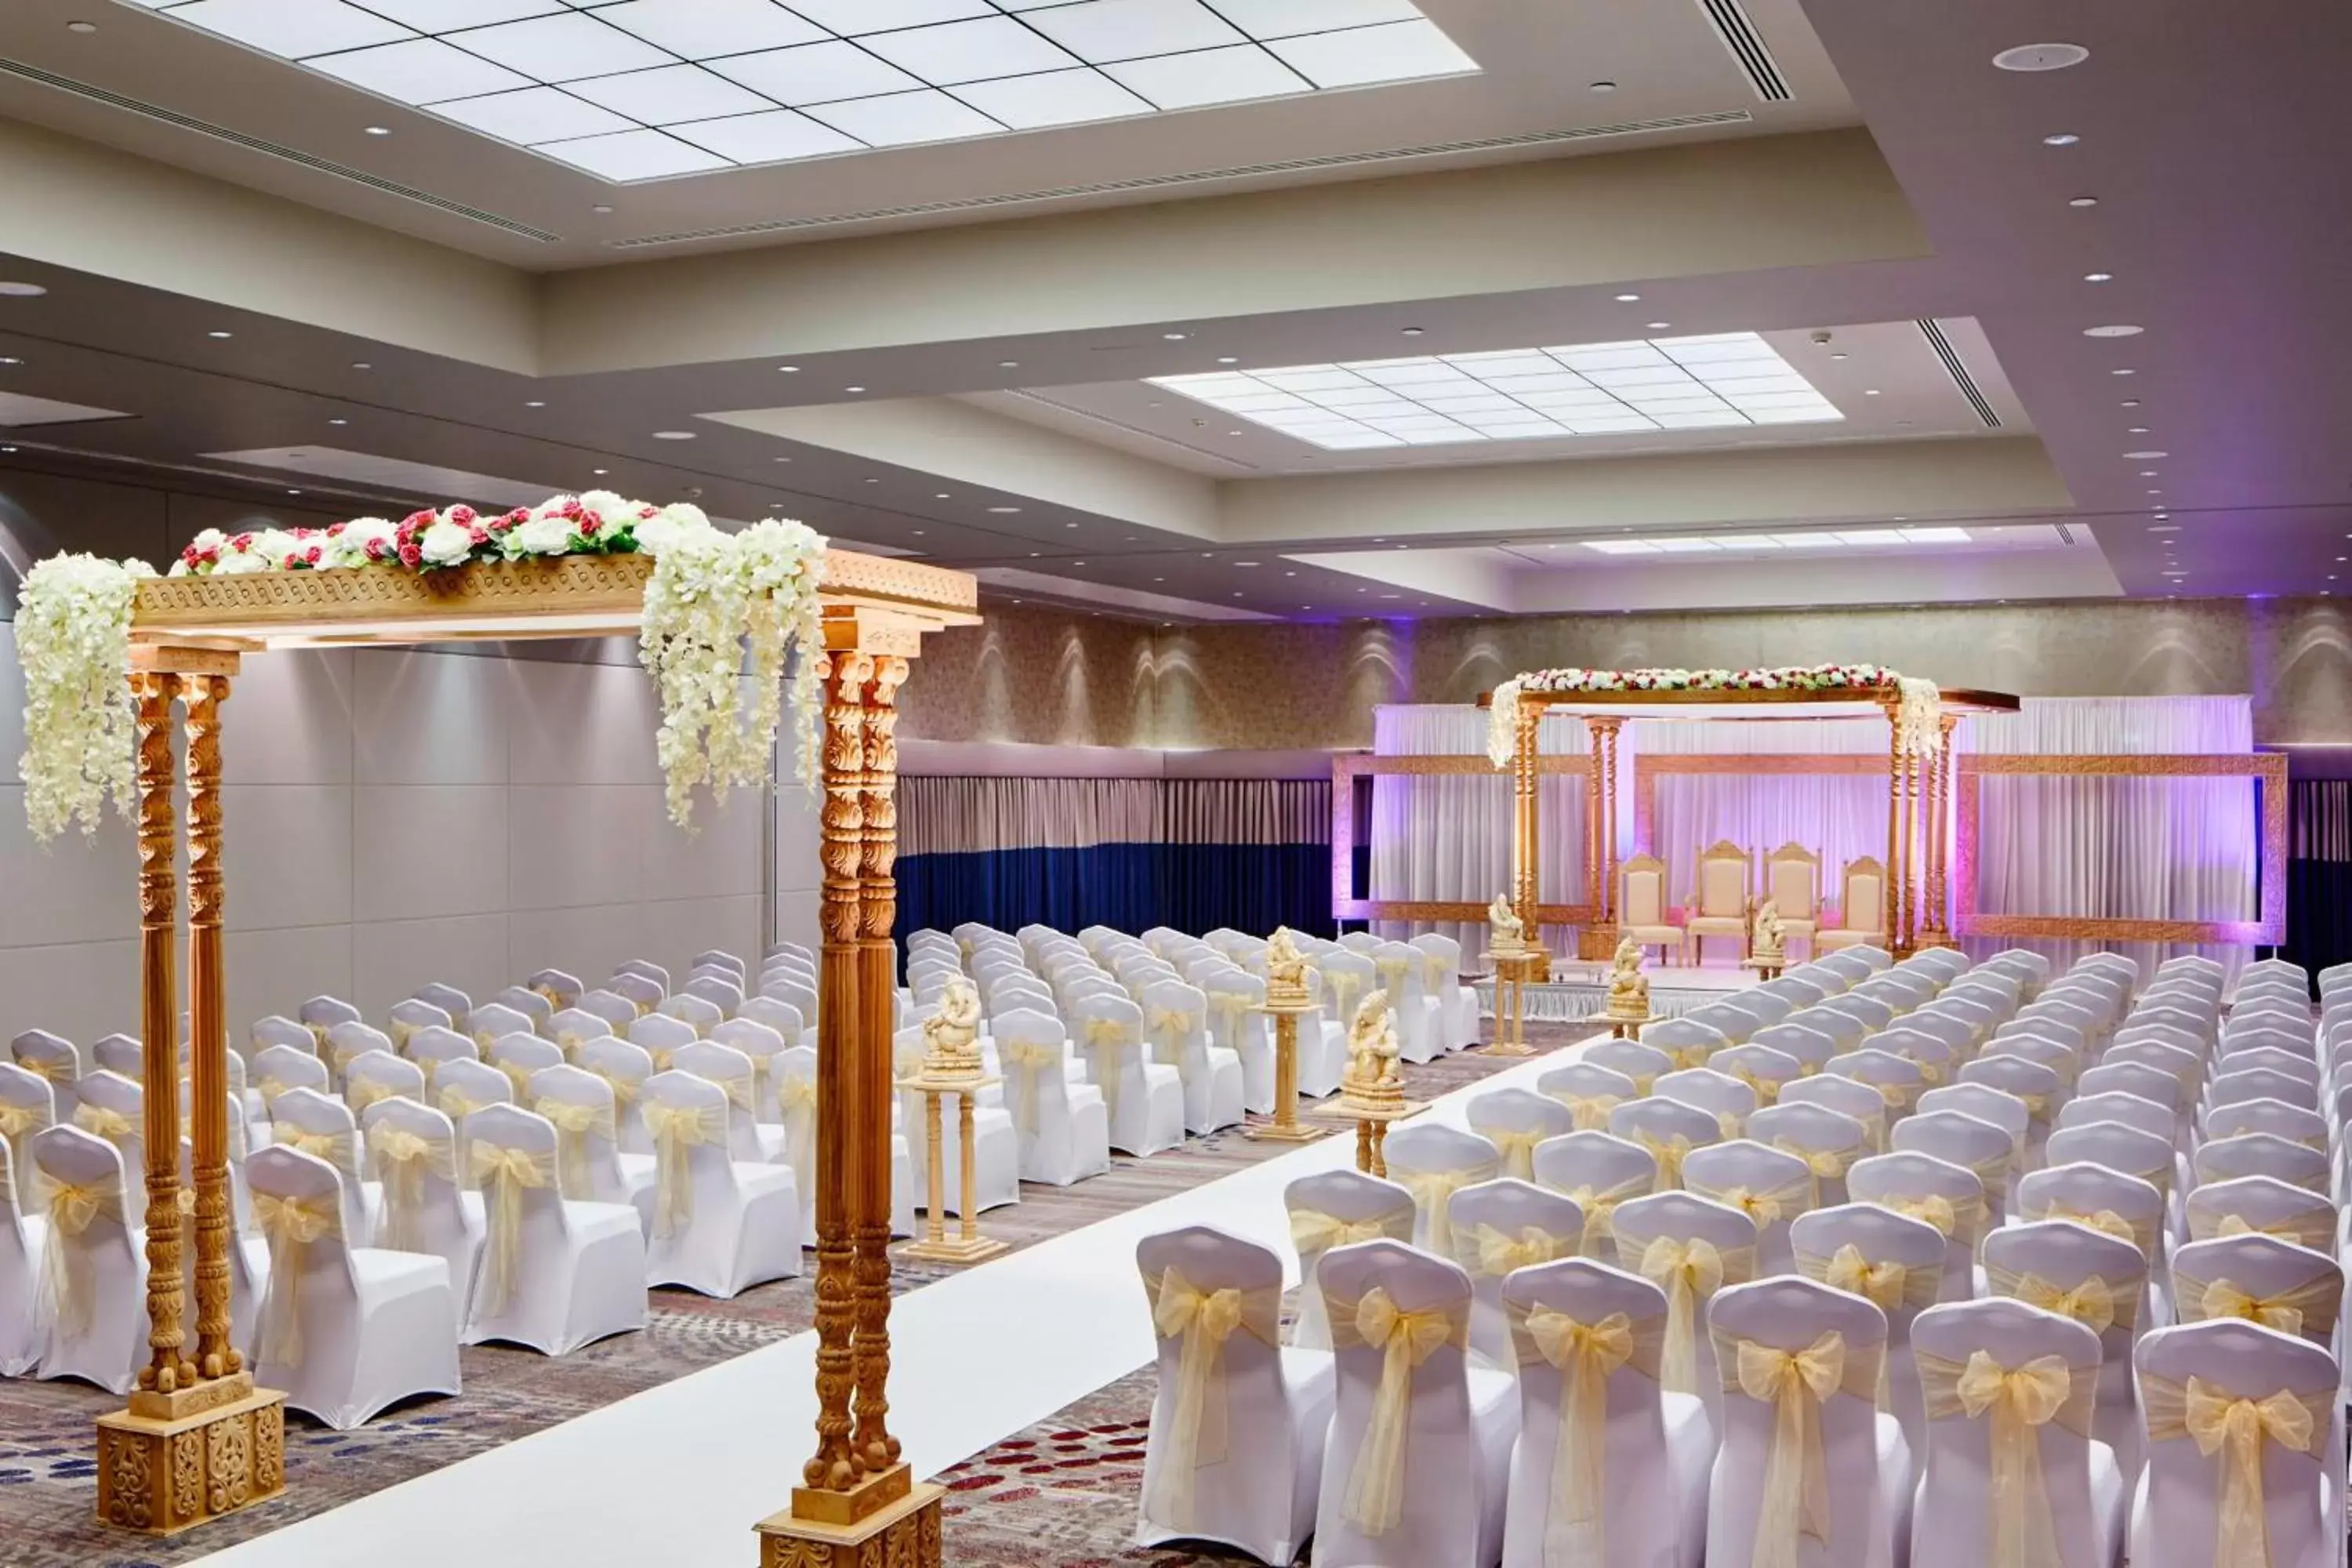 Banquet/Function facilities, Banquet Facilities in Leicester Marriott Hotel